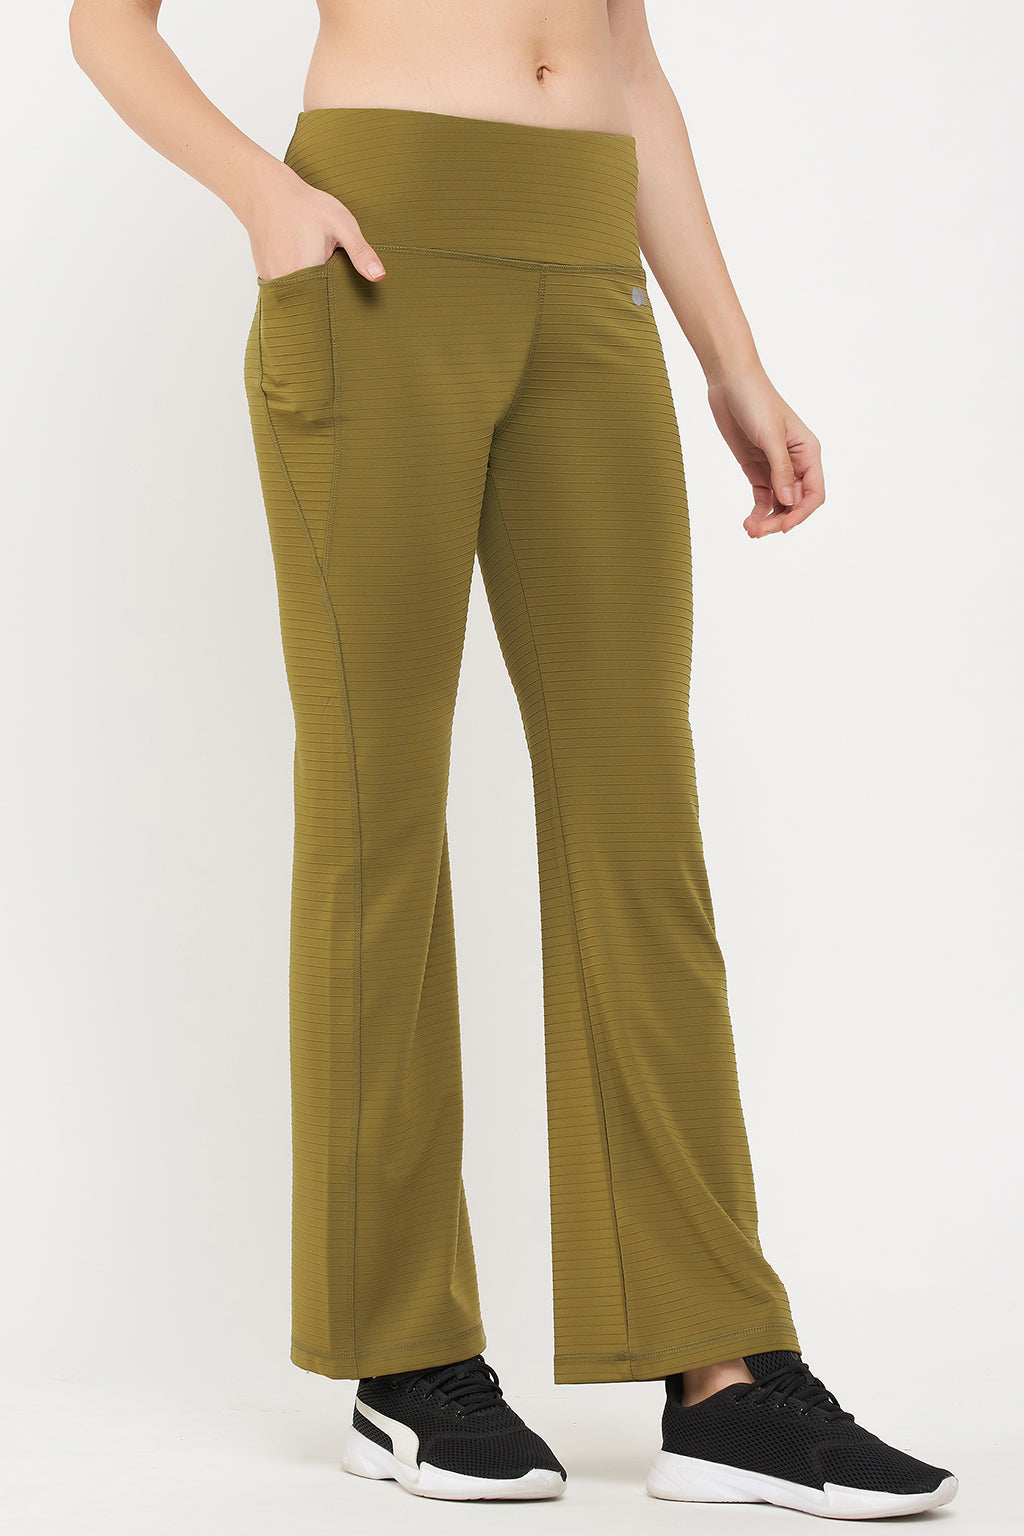 Olive Green High-Waist Flared Yoga Pants with Side Pockets